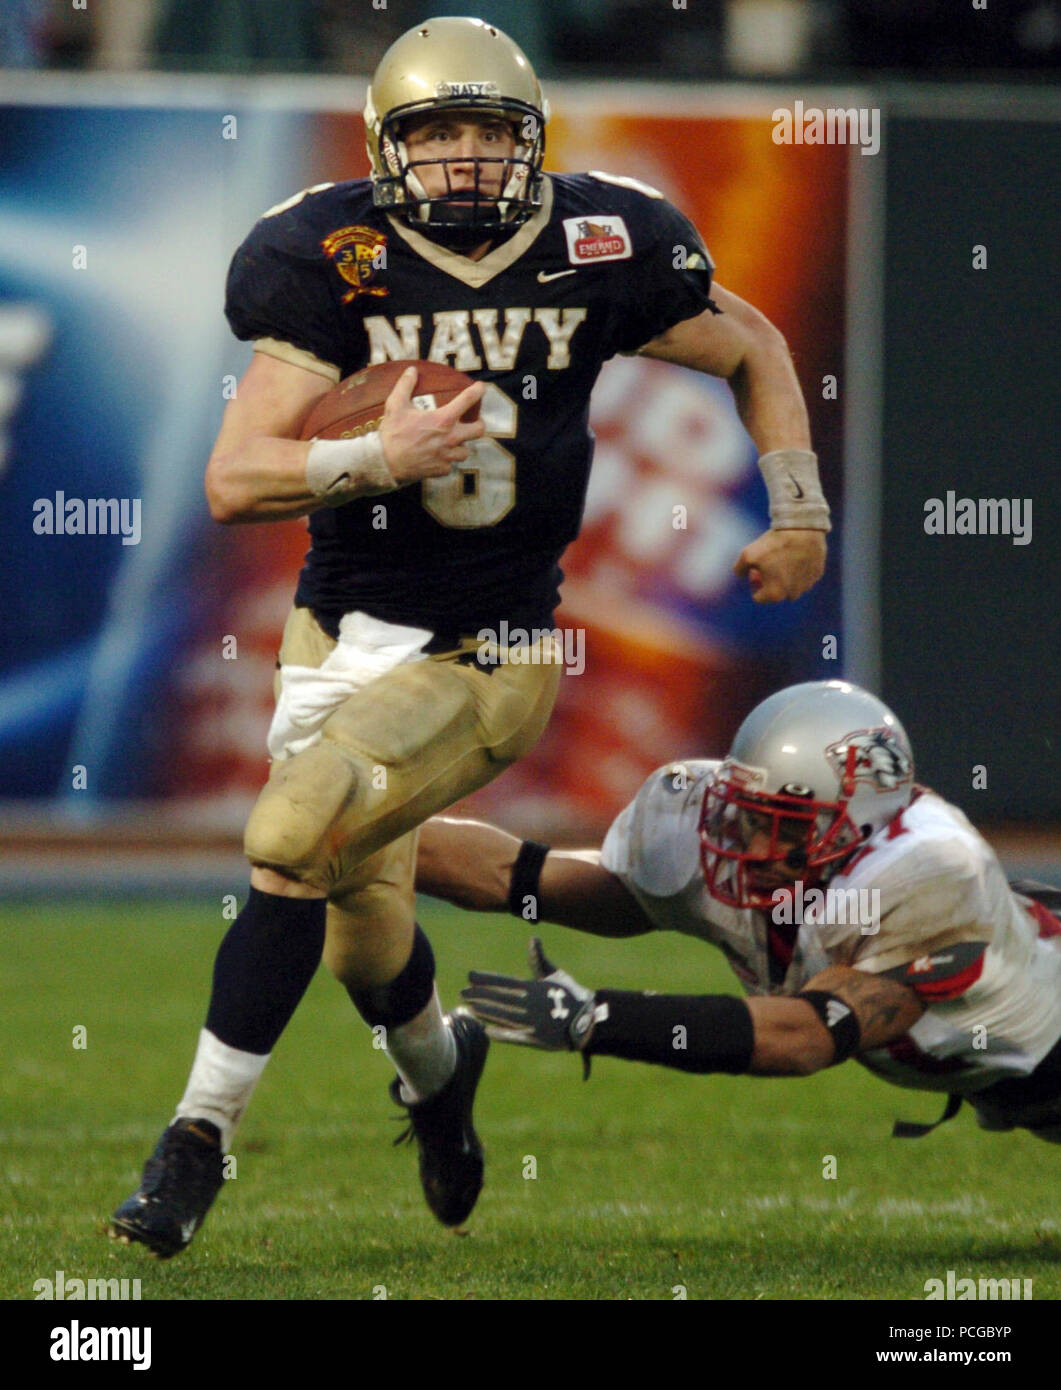 Francisco, Calif. (Dec. 29, 2004) U.S. Naval Academy Midshipman 1st Class Aaron Polanco runs for yardage in the 3rd quarter of play against the Lobos of New Mexico at the Emerald Bowl in San Francisco.  Polanco passed for 102 yards and a touchdown and rushed for 133 yards and three more scores for the Midshipmen (10-2)  The Senior quarterback was 3-of-6 passing with 26 rushes, also caught two passes for 23 yards. Navy triumphed over New Mexico 34-19 for their first bowl win since 1996 and first 10 game winning record in 99 years. U.S. Navy Stock Photo